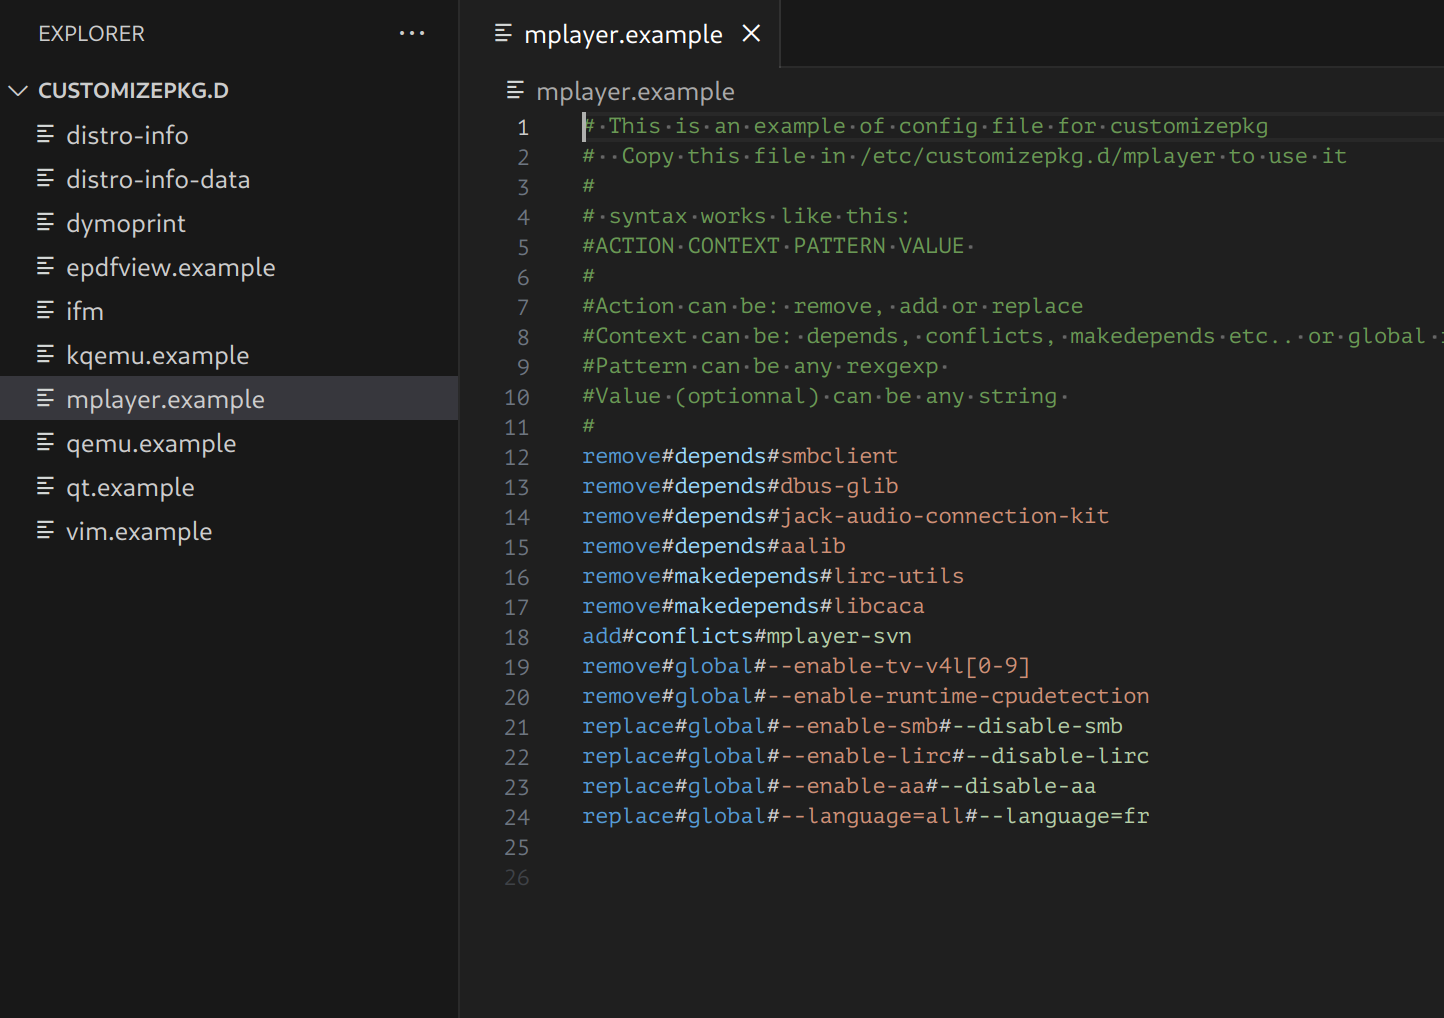 Screenshot of a customizepkg-style patch file opened in VS Code with the Packaging extension installed, showcasing support for syntax highlighting.